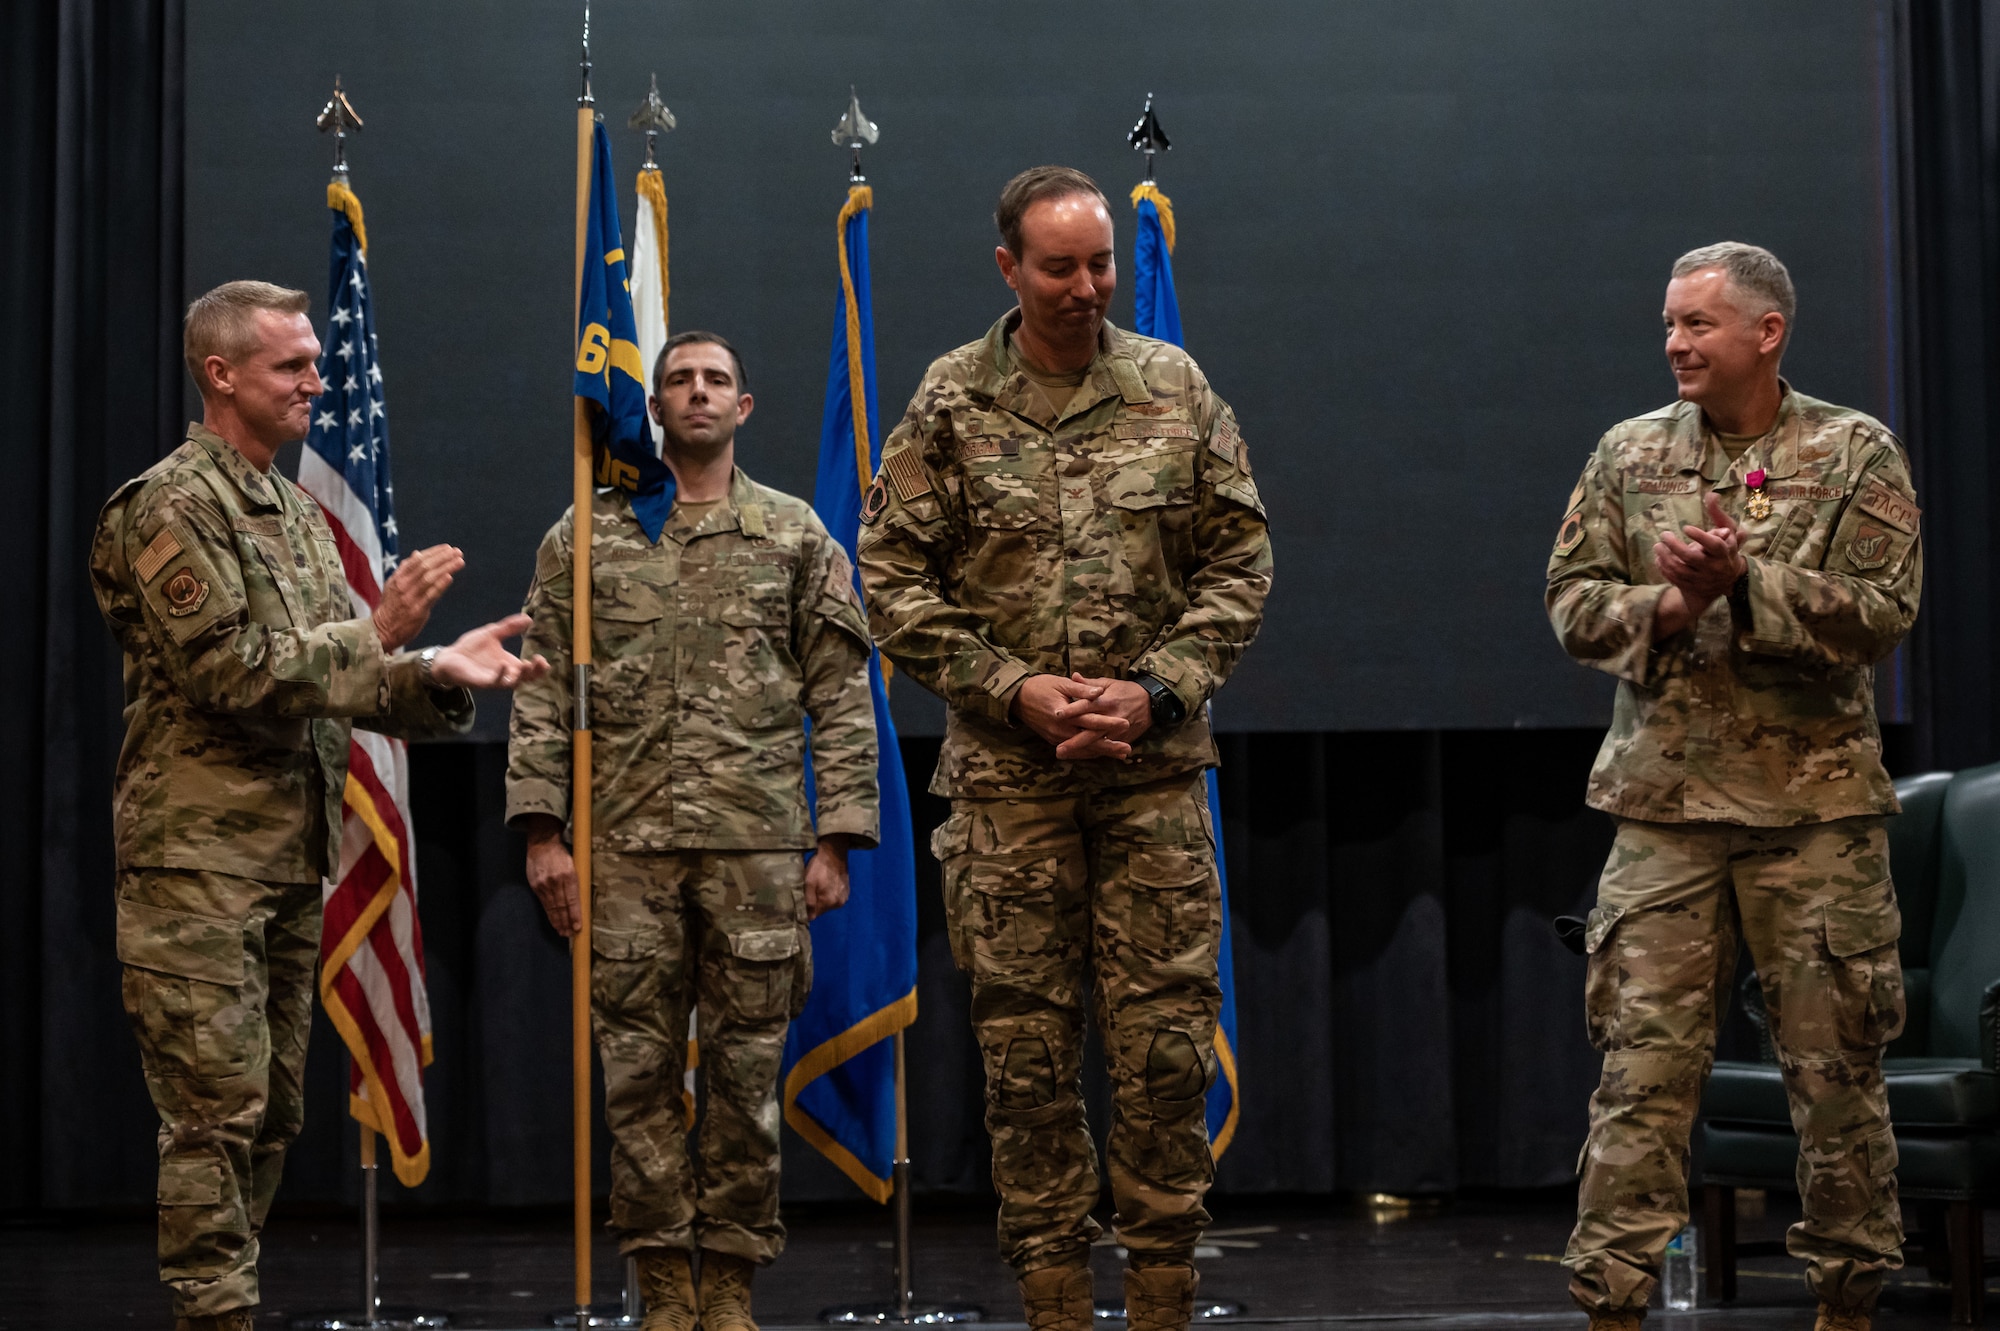 Brig. Gen. Jason Rueschhoff, 7th Air Force deputy commander, left, and Col. William Edmunds, 607th Air Support Operations Group outbound commander, right, congratulate Col. Scott Morgan, 607th ASOG commander at Osan Air Base, Republic of Korea, June 22, 202. With the passing of the guidon, Morgan begins his tenure as the commander of the 607th ASOG. (U.S. Air Force photo by Tech. Sgt. Nicholas Alder)